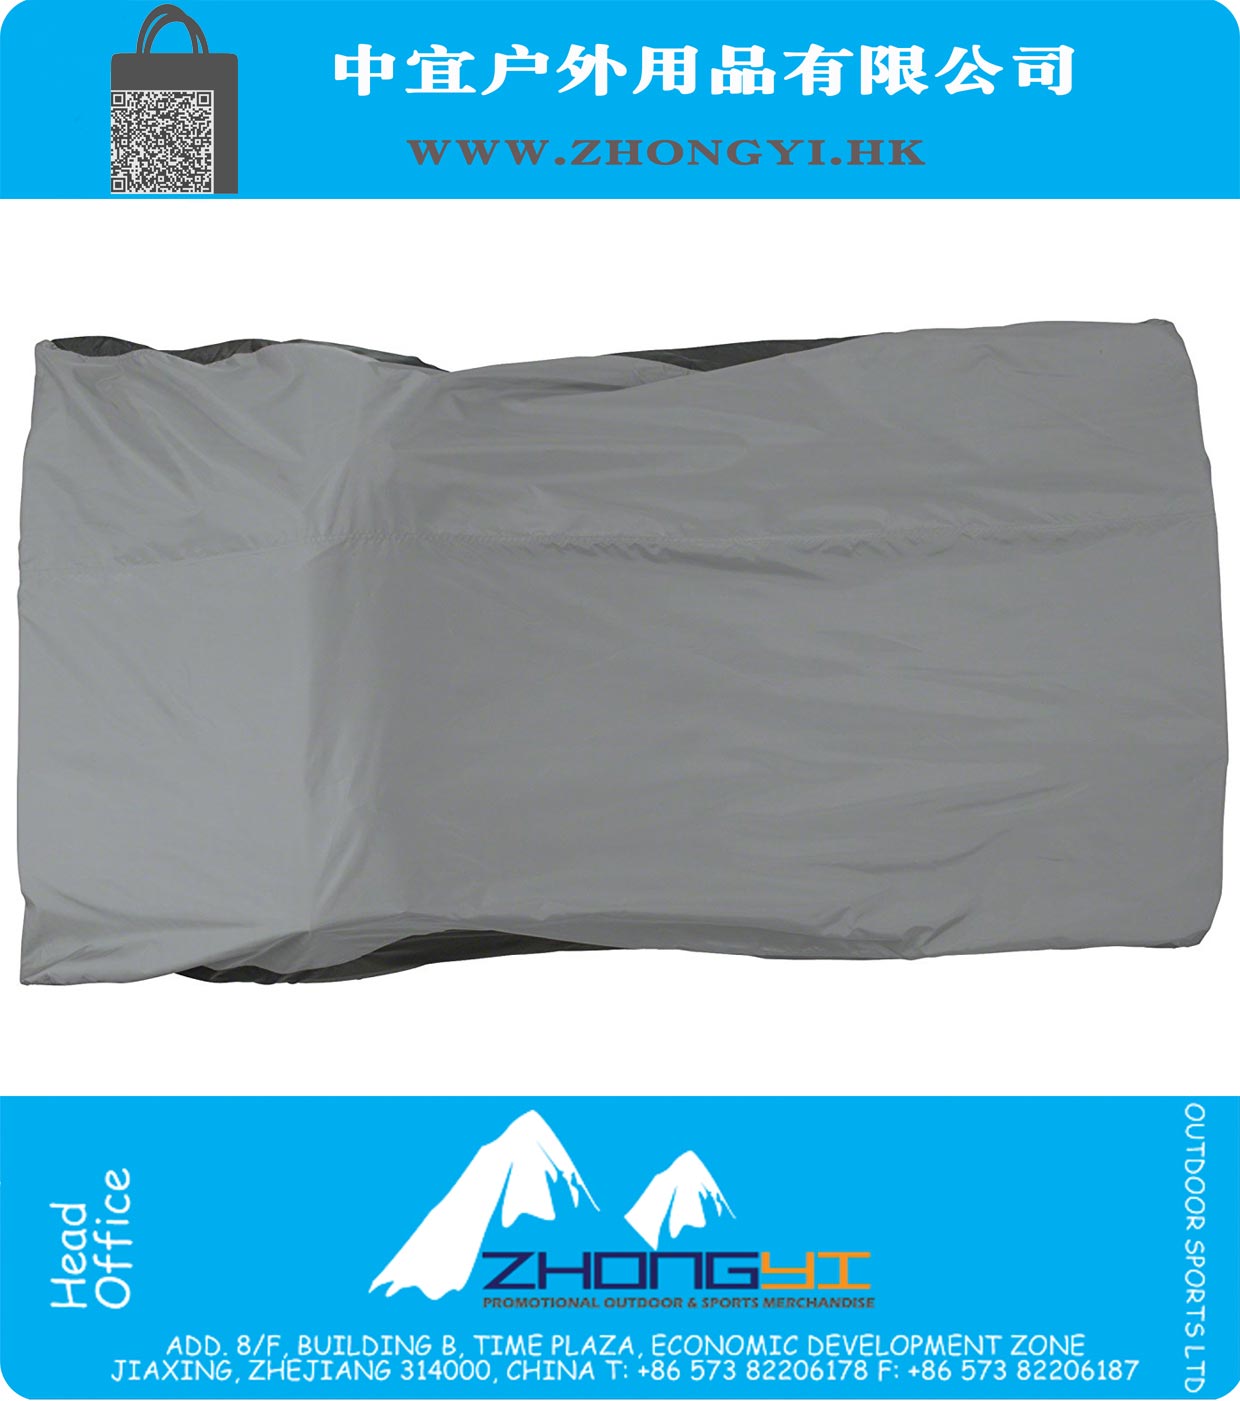 Durable ProtekX2 fabric with water-resistant backing and exterior coating for great weather and abrasion protection Elastic cord hem for a fast, tight and secure fit Storage bag included One-year limited warranty